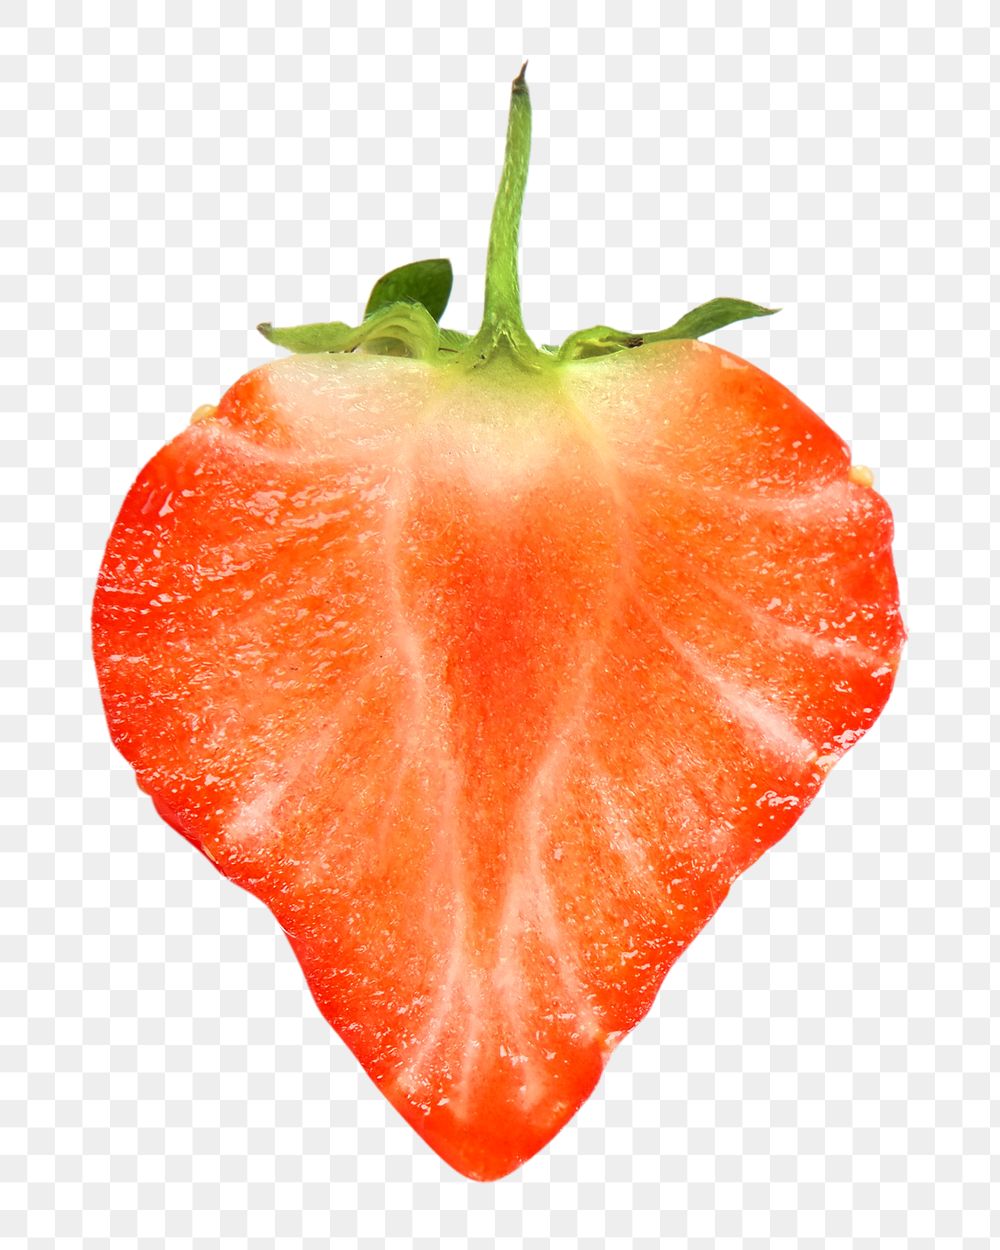 Sweet juicy strawberry png, transparent background